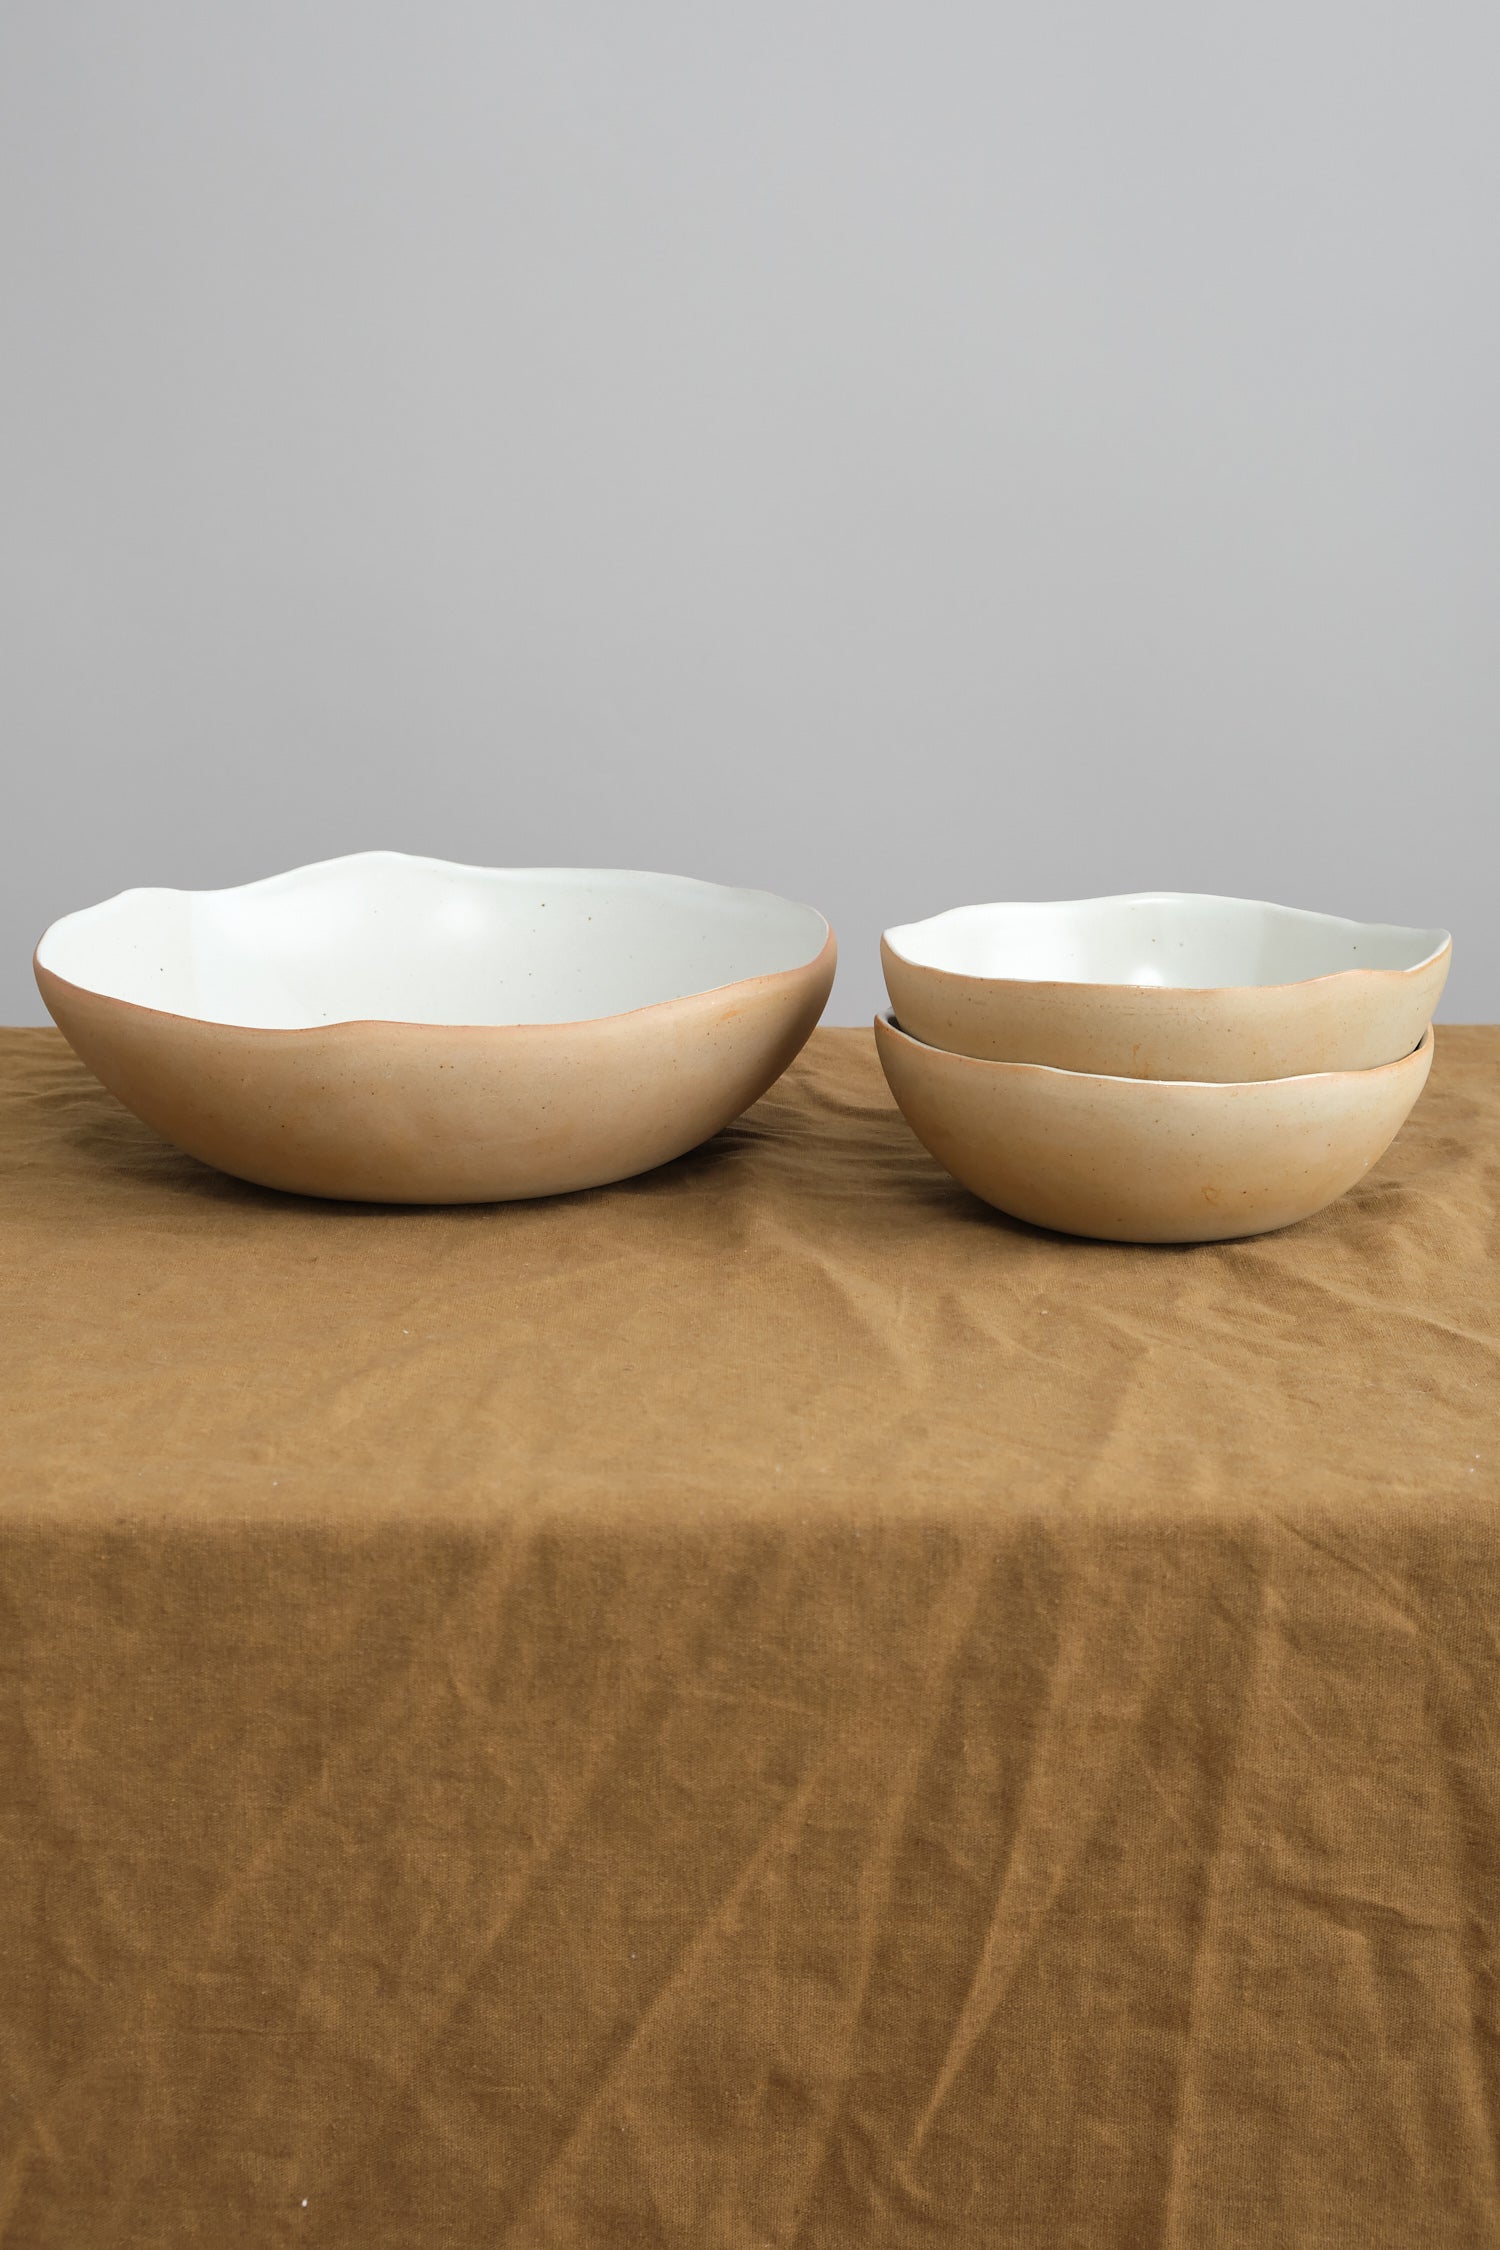 Eggshell bowls styled together